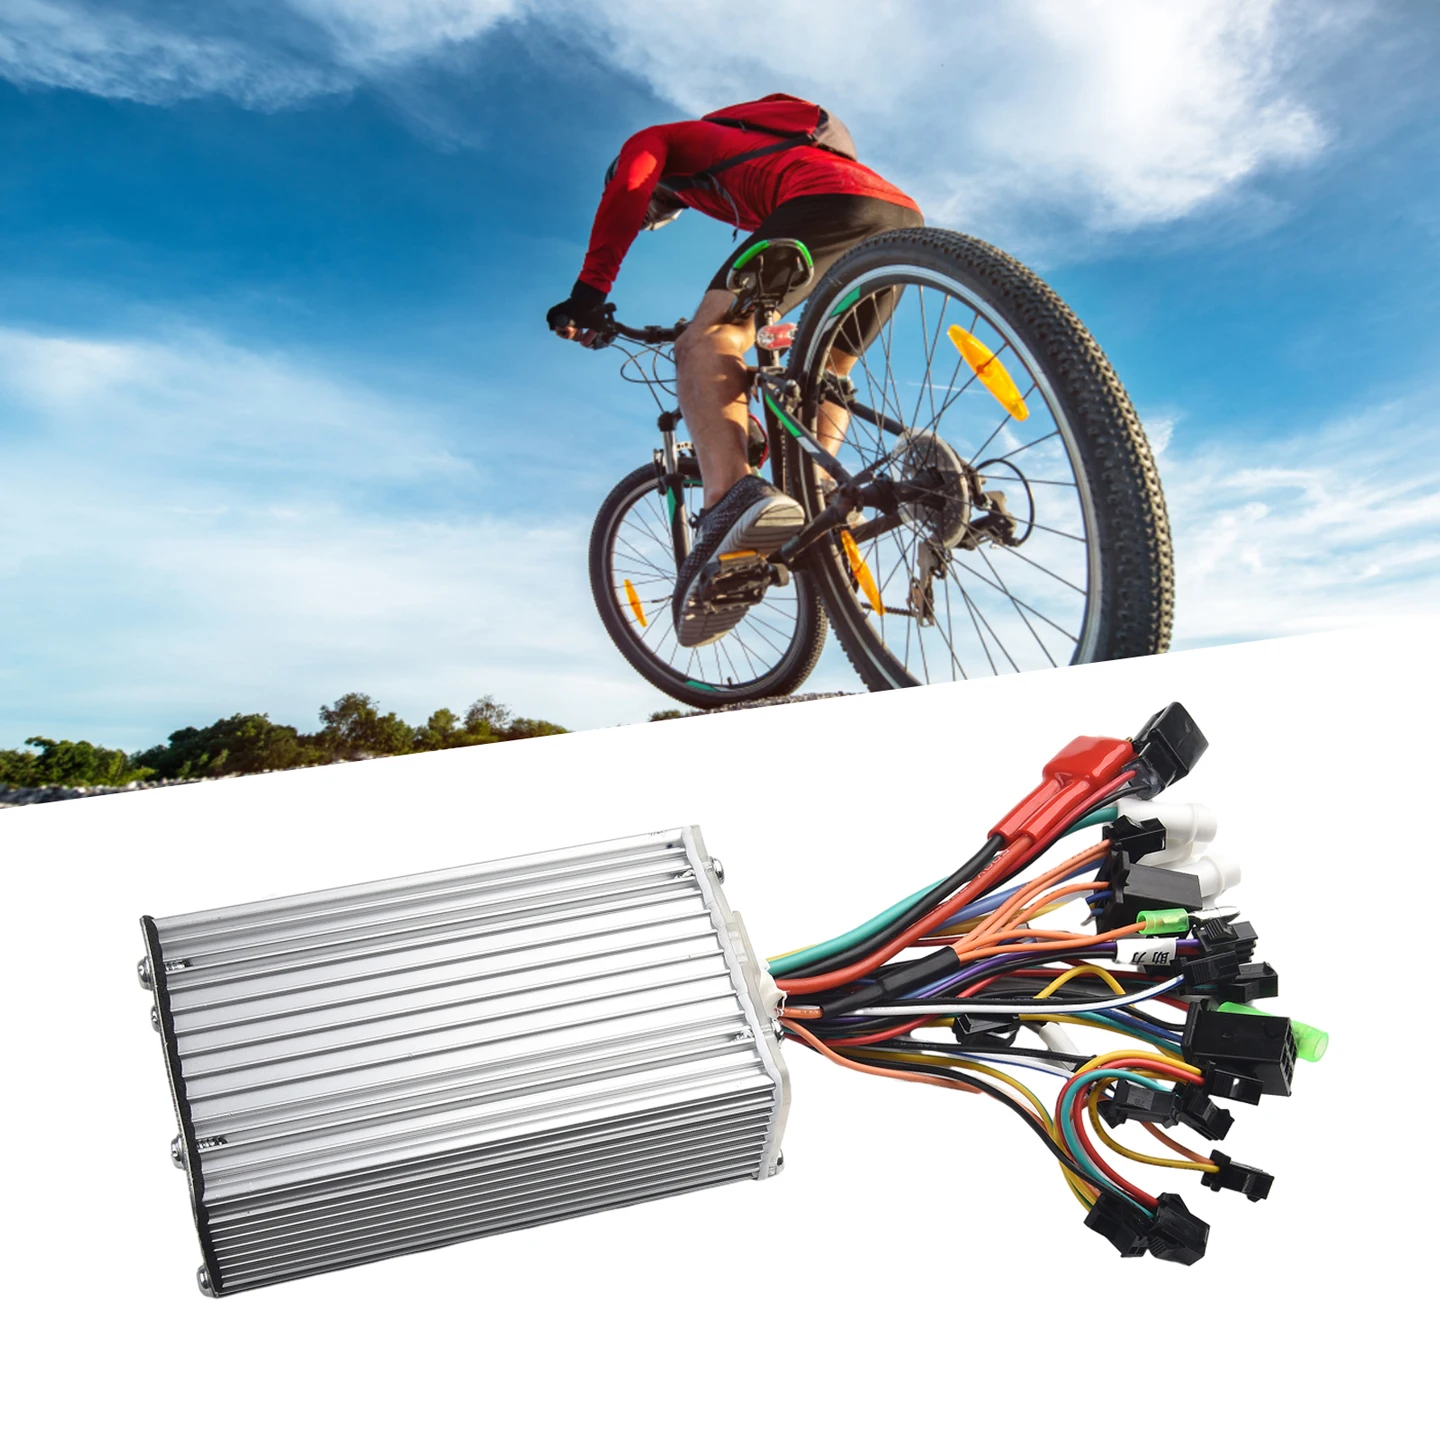 

36V48V 350W/500W Electric Bicycle Scooter Brushless Controller E-Bike Sine Wave DC Motor Controller Electric Bike Parts